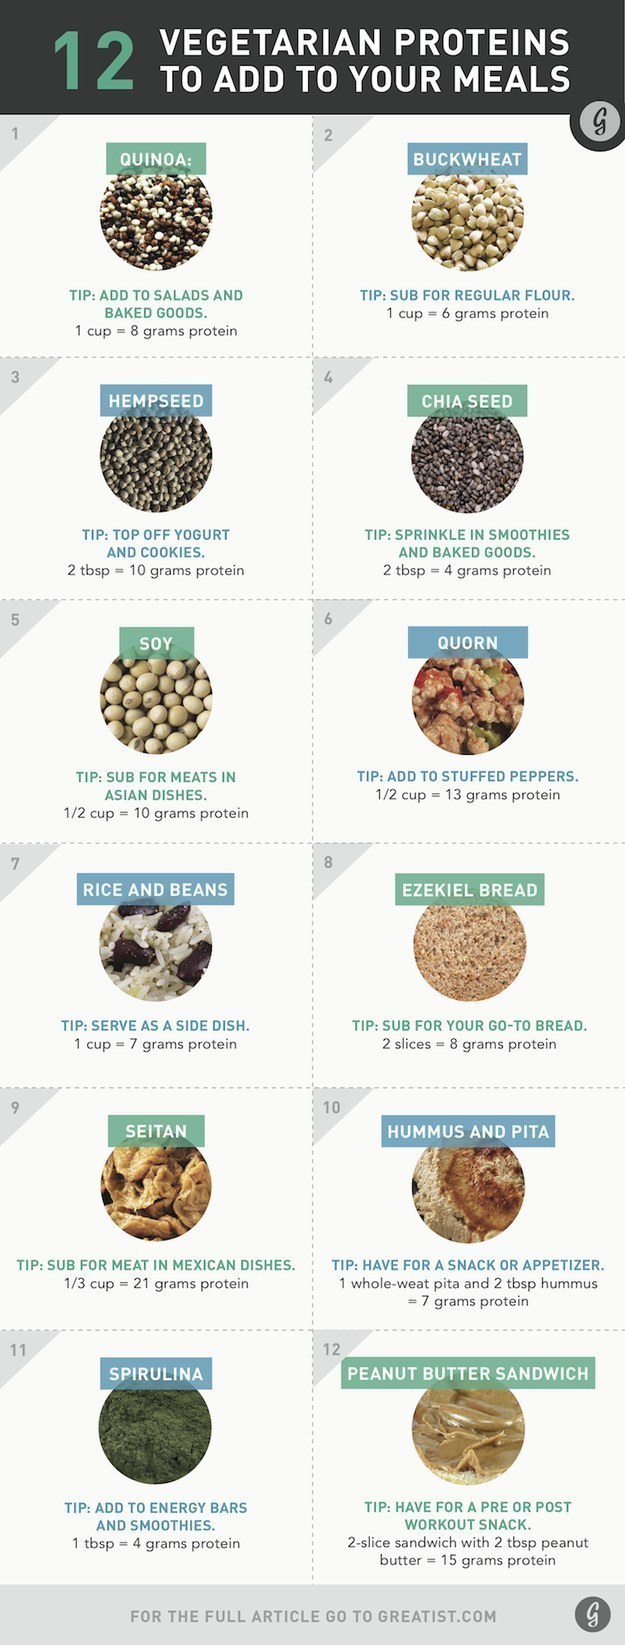 You need to eat a variety of protein sources every day — it's not enough to just eat a lot of quinoa and call it a day.